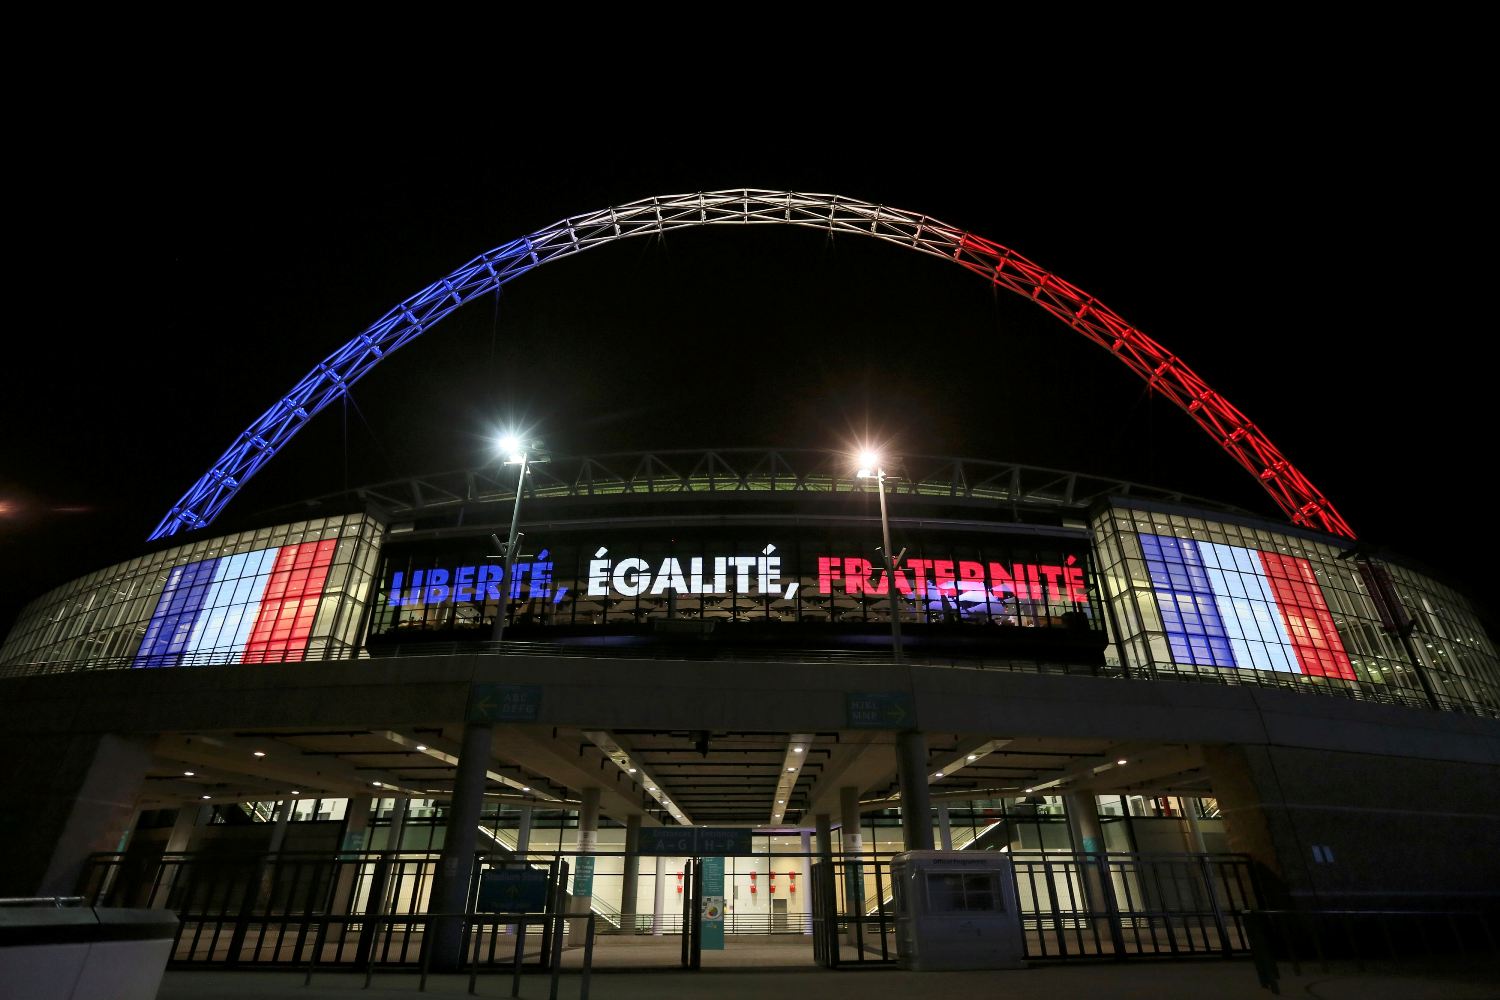 London welcomes with open arms the French national team following the Paris attacks